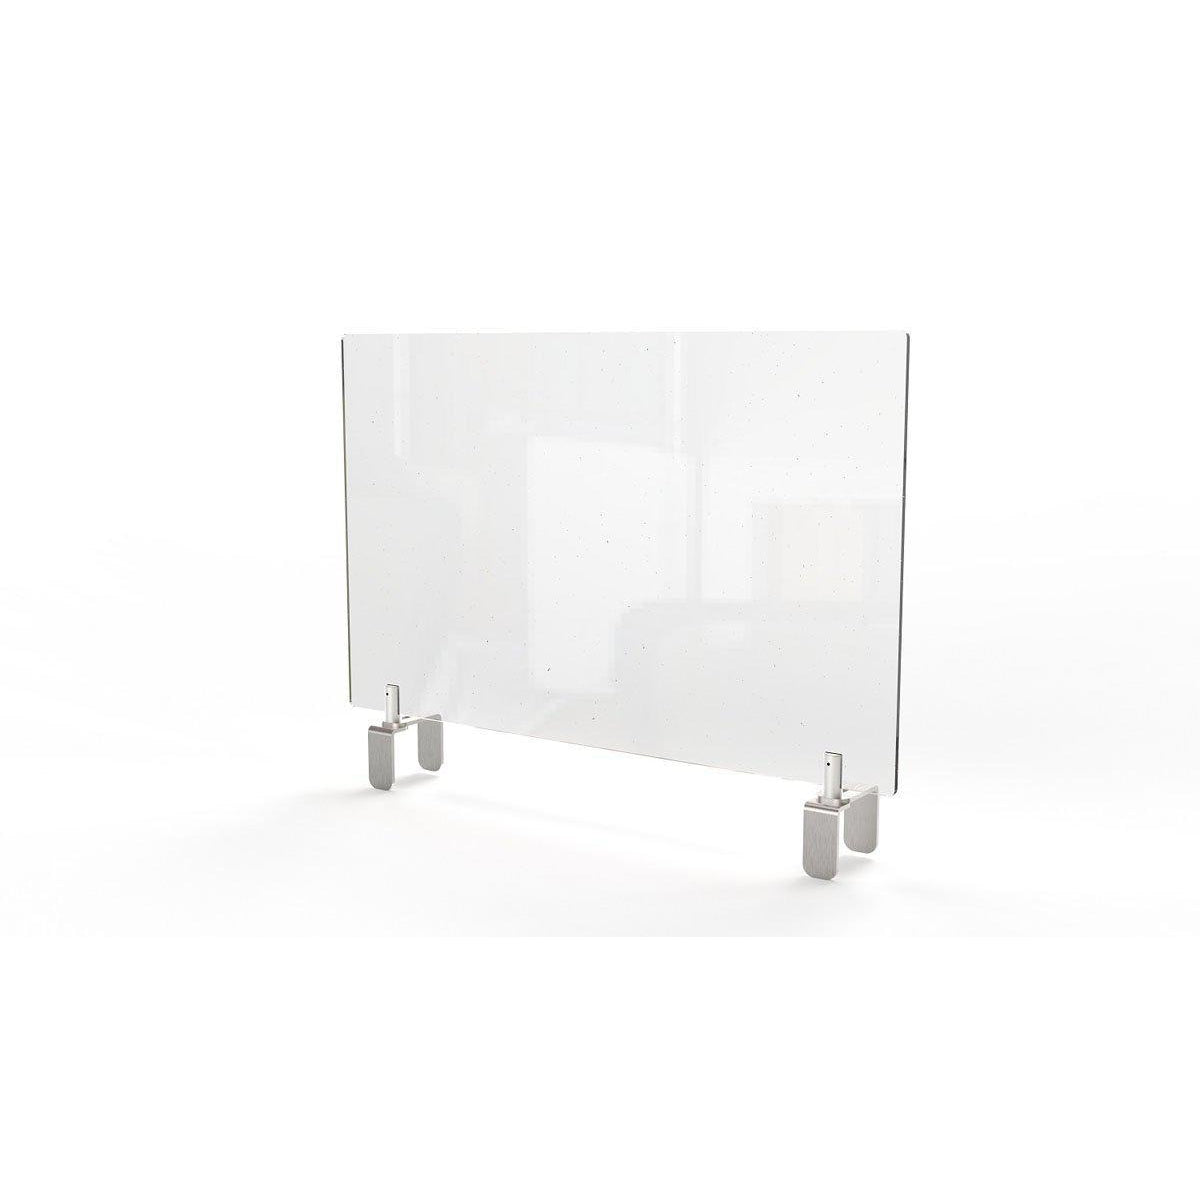 Clear Thermoplastic Partition & Cubicle Extender with Adjustable Clamp Attachment, 30"H x 24"W